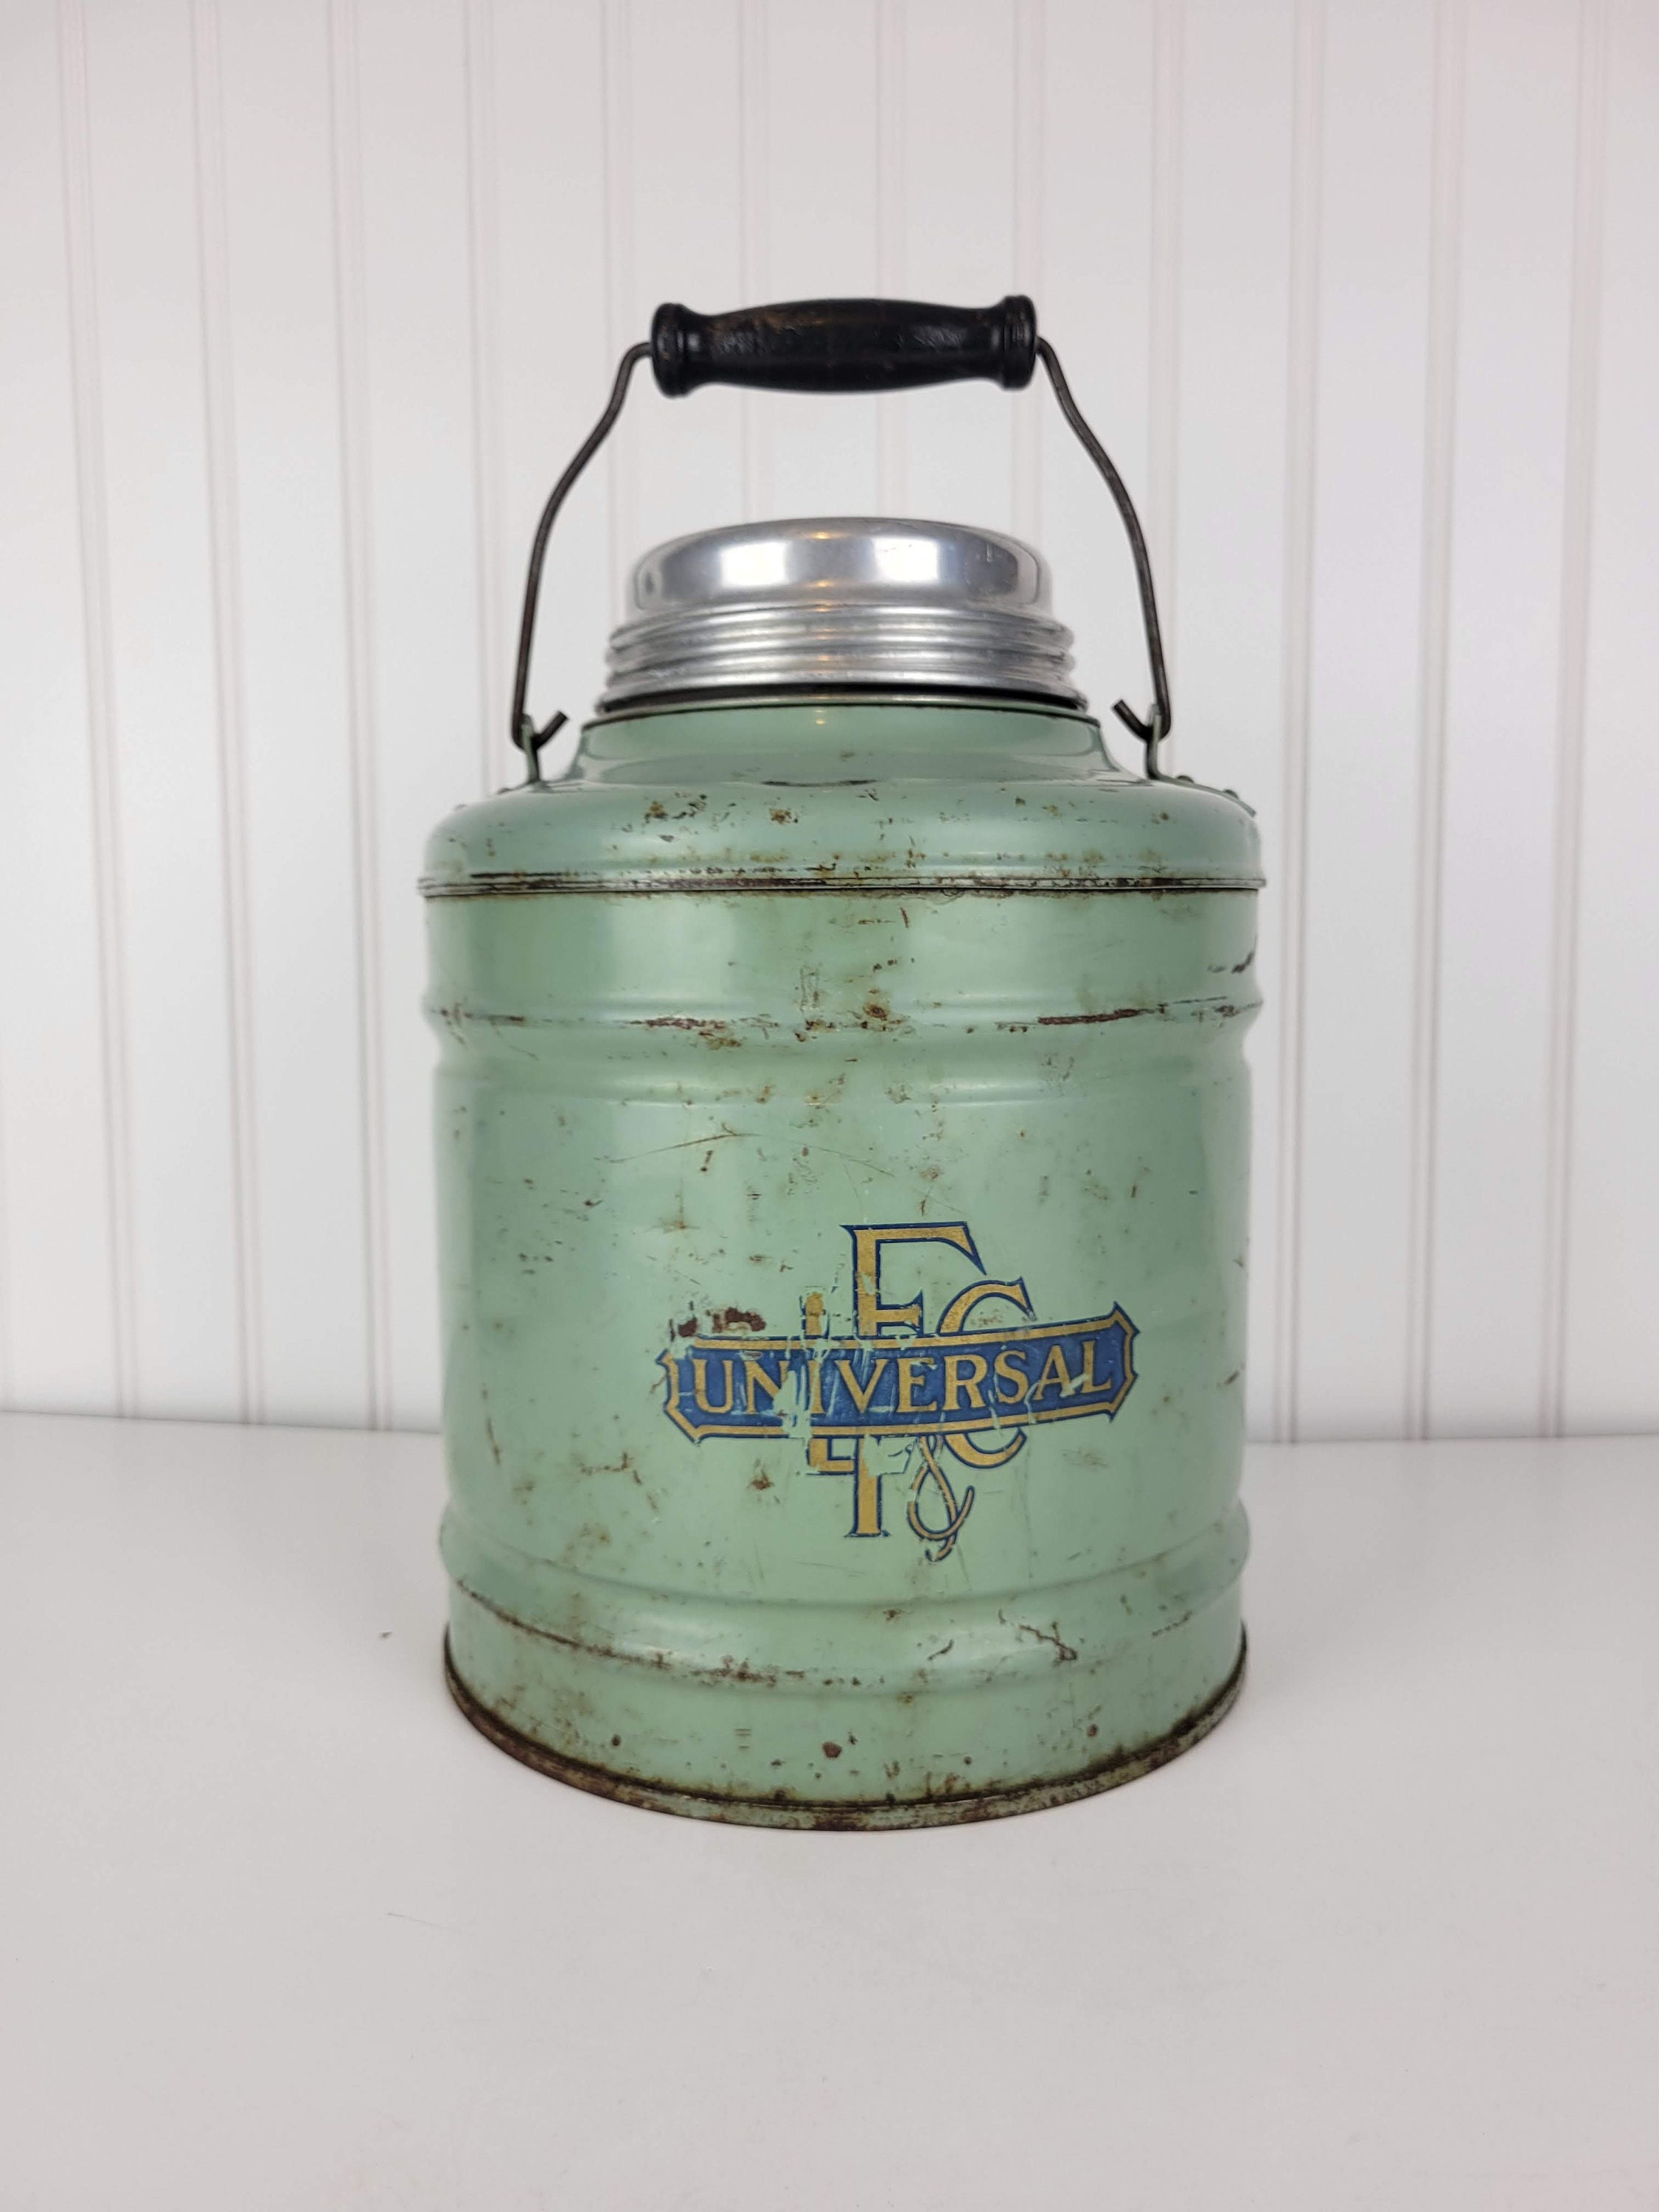 Vintage Thermos One Gallon Green Water Jug Spigot Drink Picnic Cooler